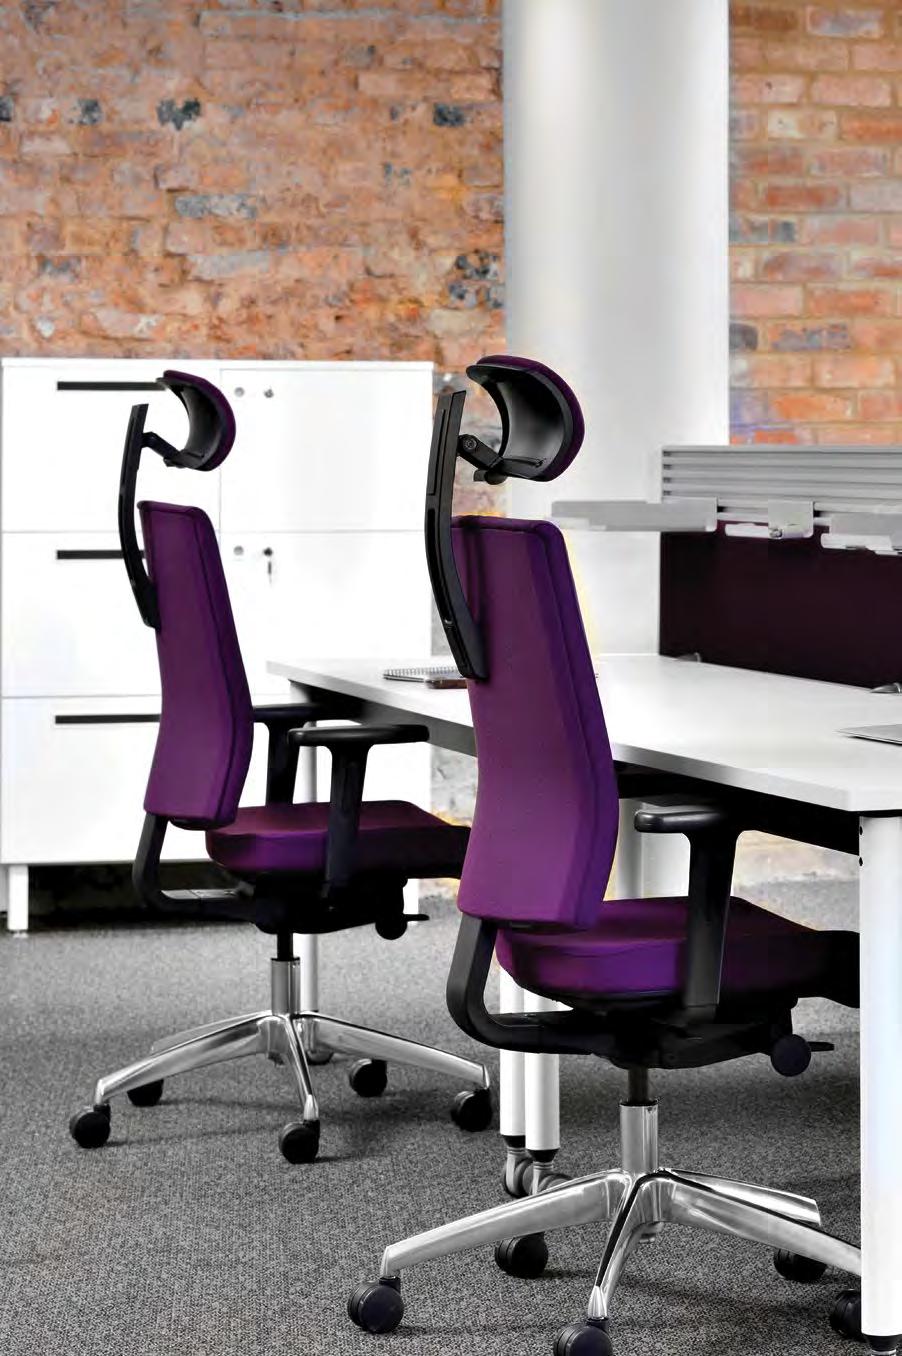 Task chair and matching cantilever visitor chair Waterfall seat Synchronised mechanism providing freefloat back action,